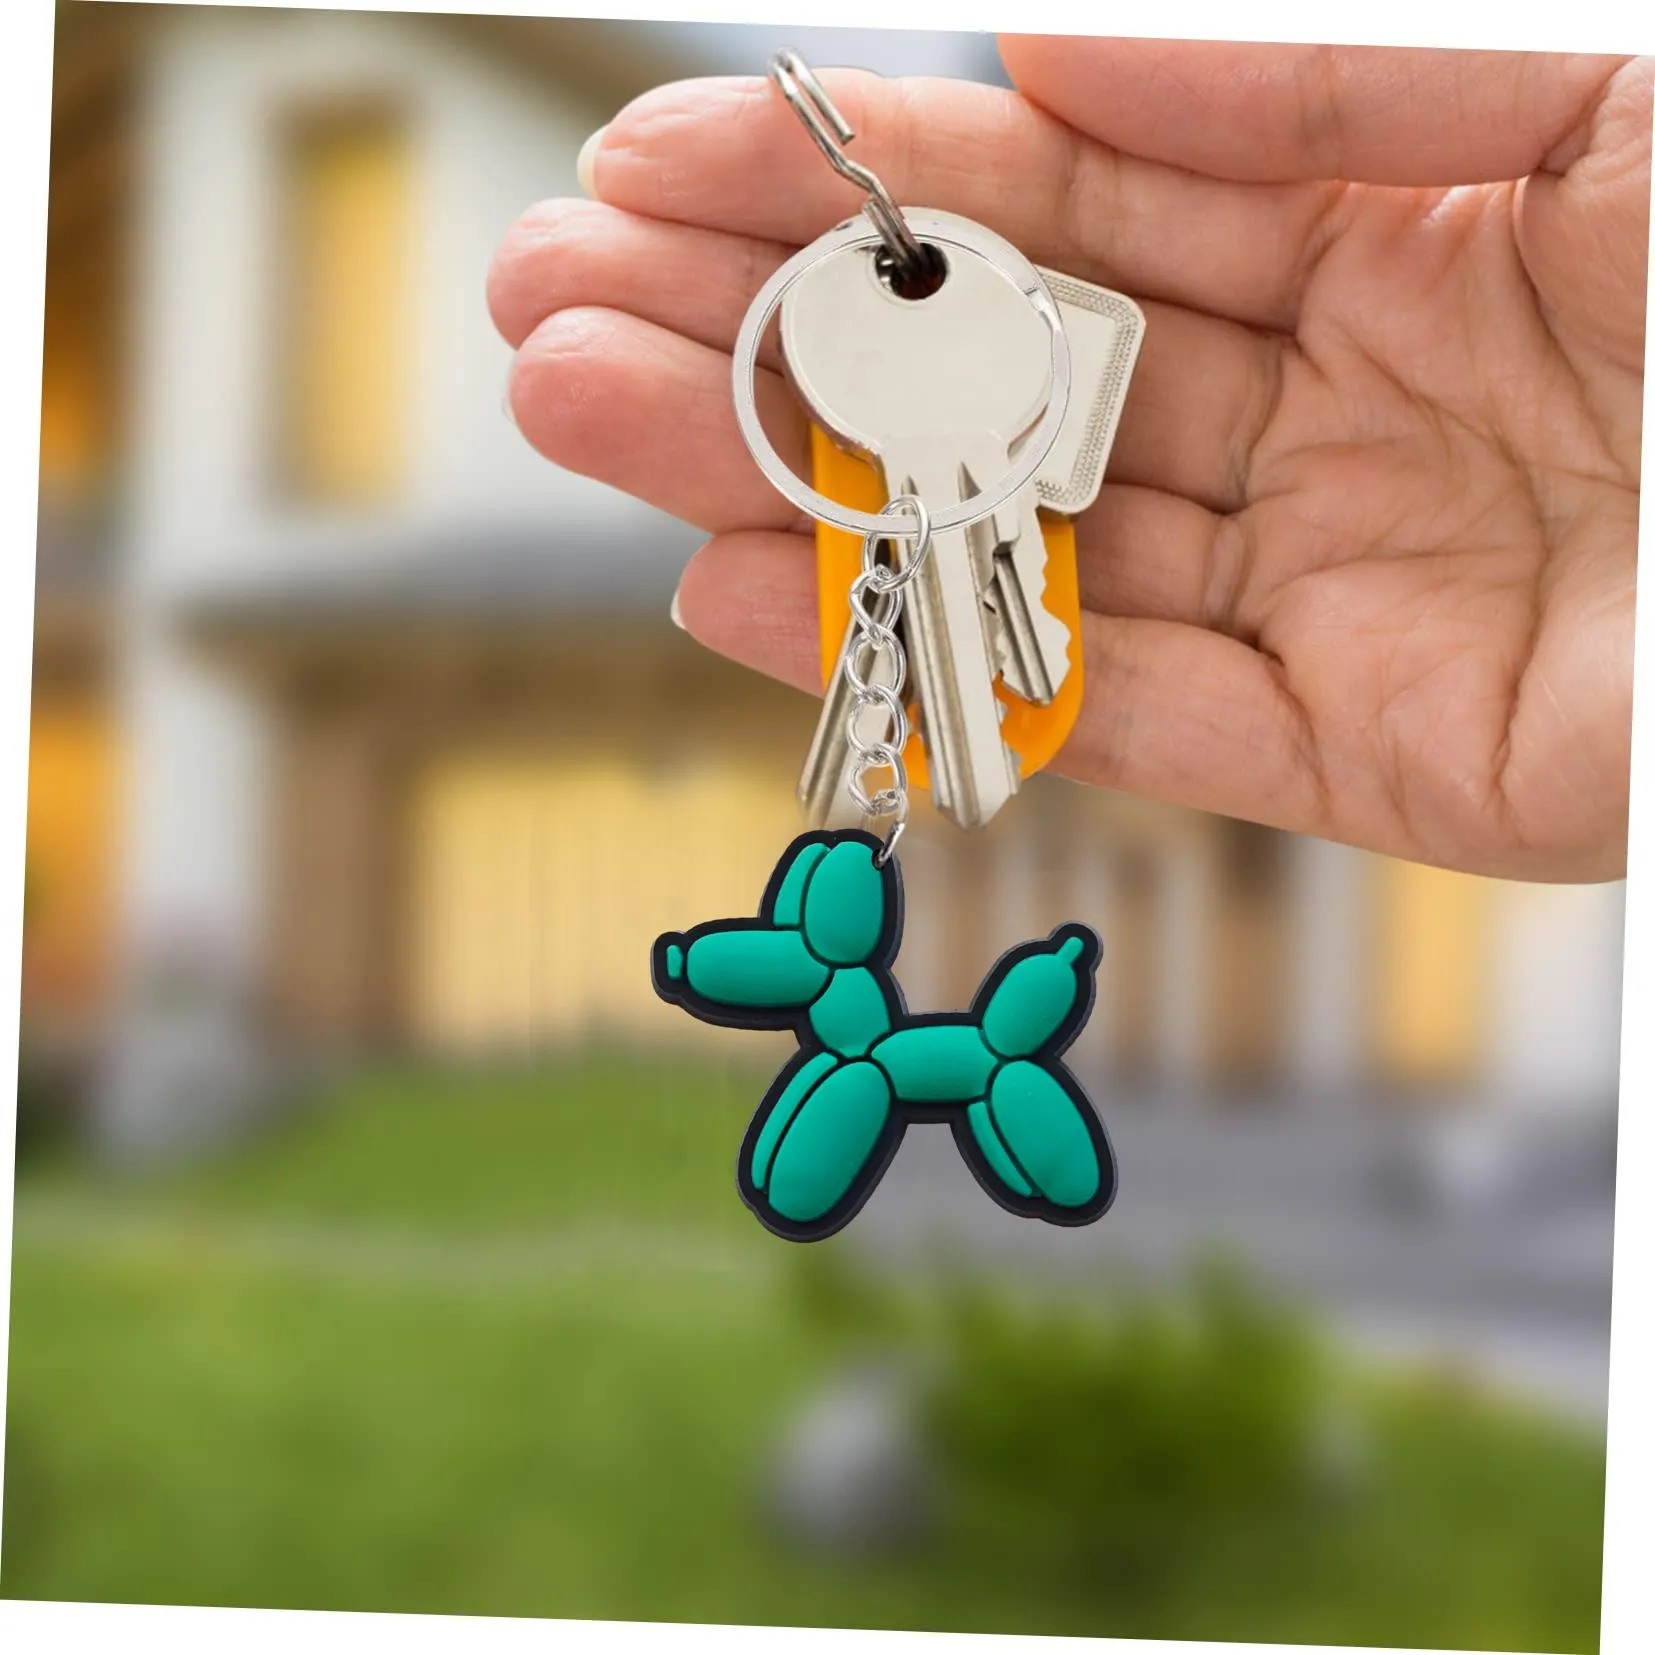 balloon dog keychain boys keychains anime cool for backpacks key pendant accessories bags keyring suitable schoolbag classroom prizes girls couple backpack chains women